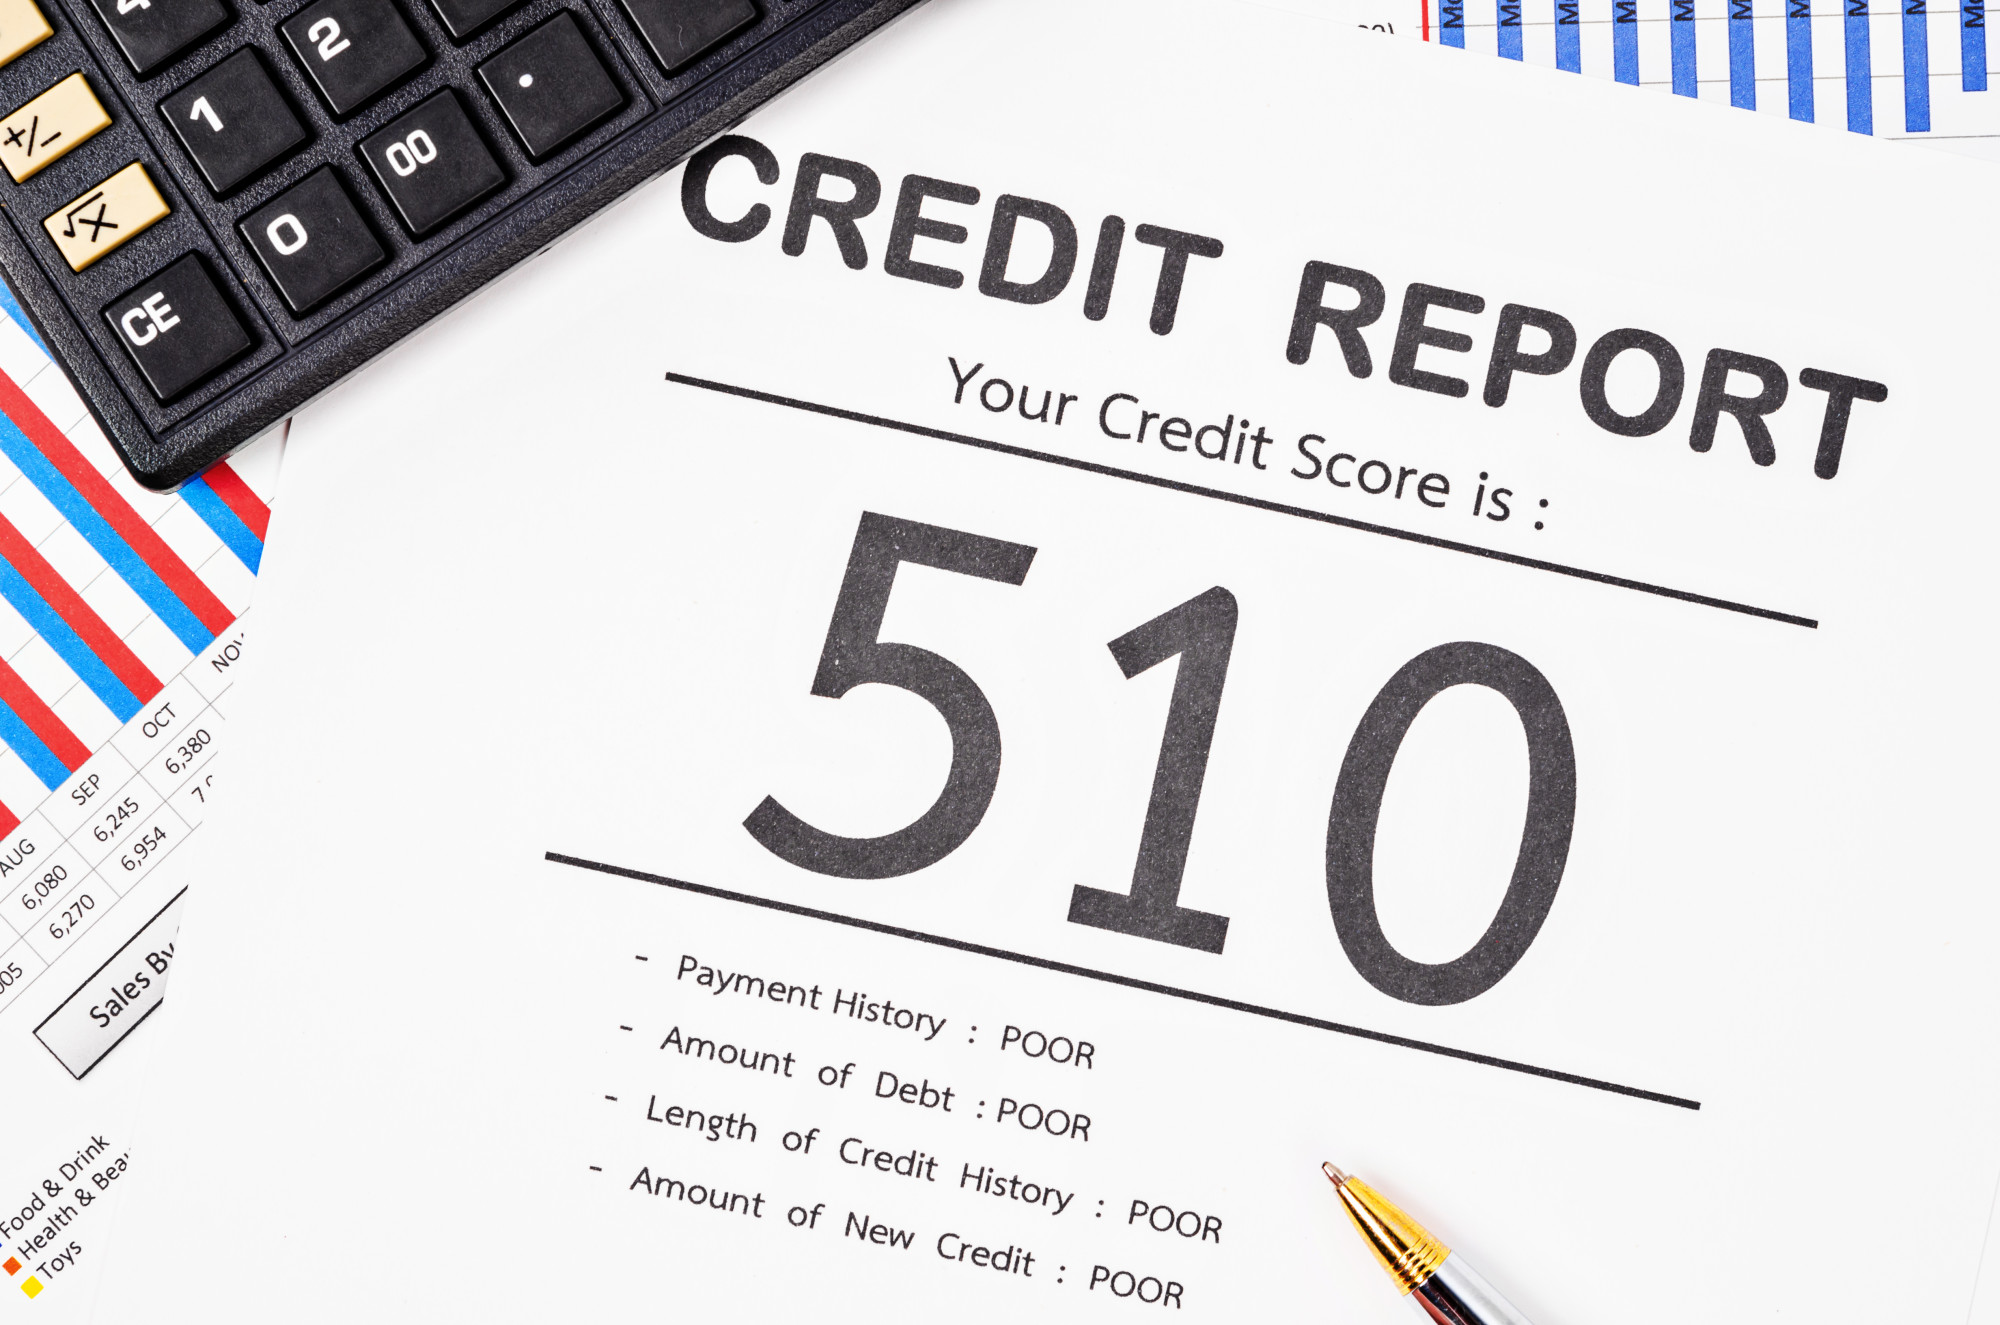 Is 500 a good credit score